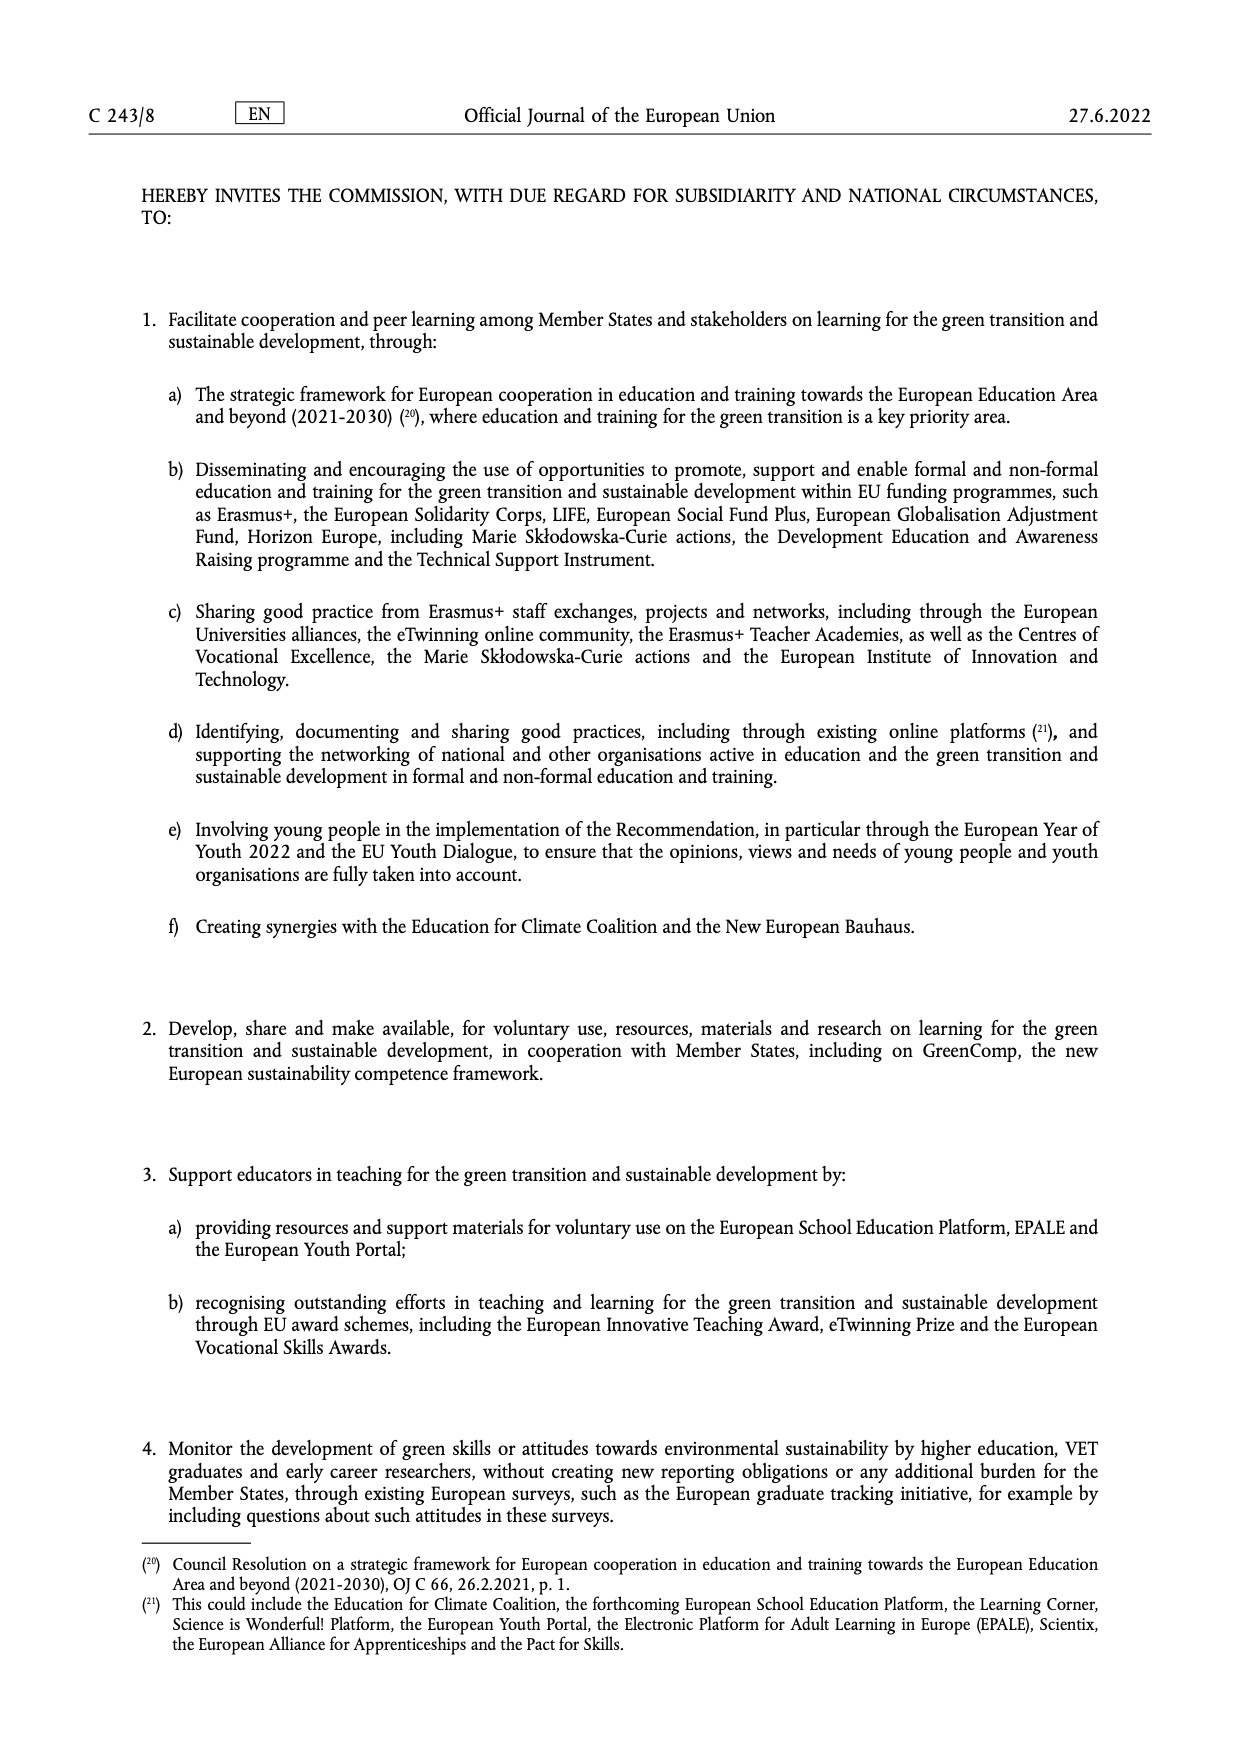 Council recommendation on learning for the green transition and sustainable development 3